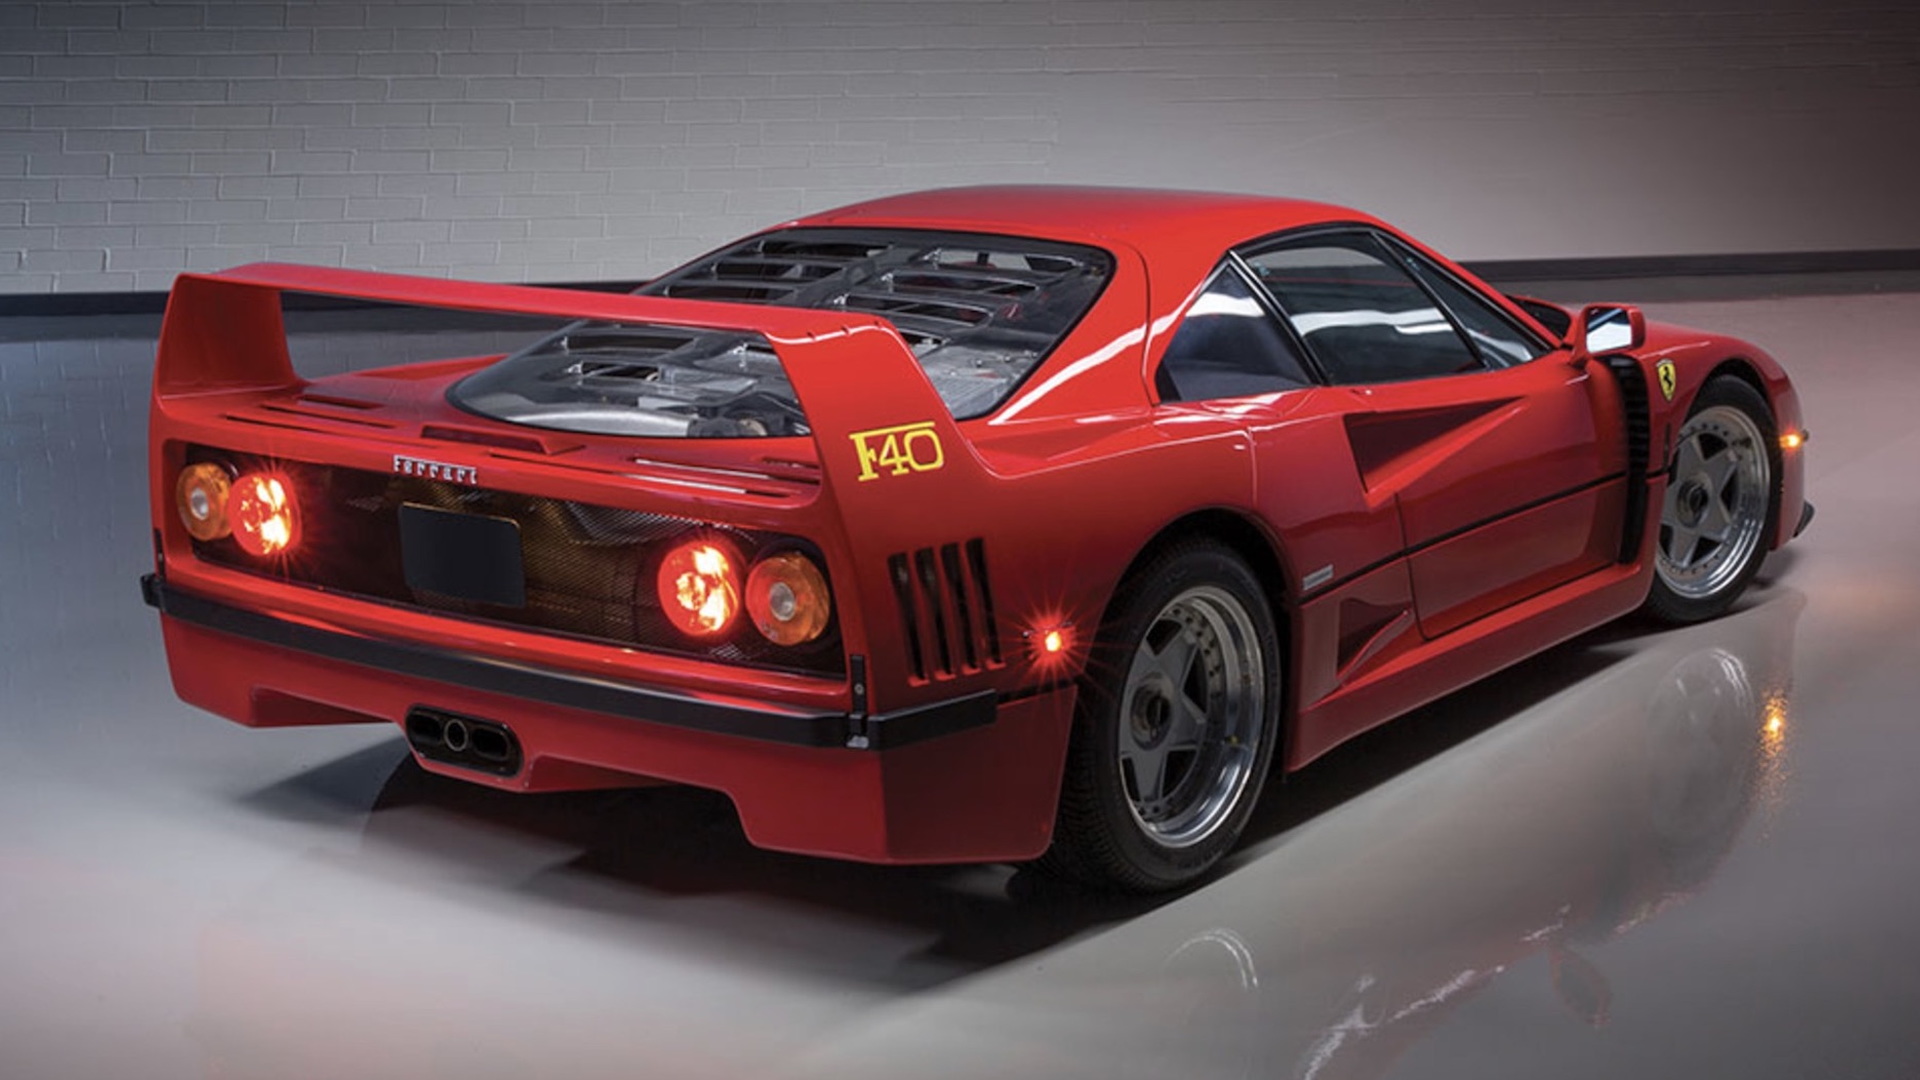 1991 Ferrari F40 for sale by RM Sotheby's